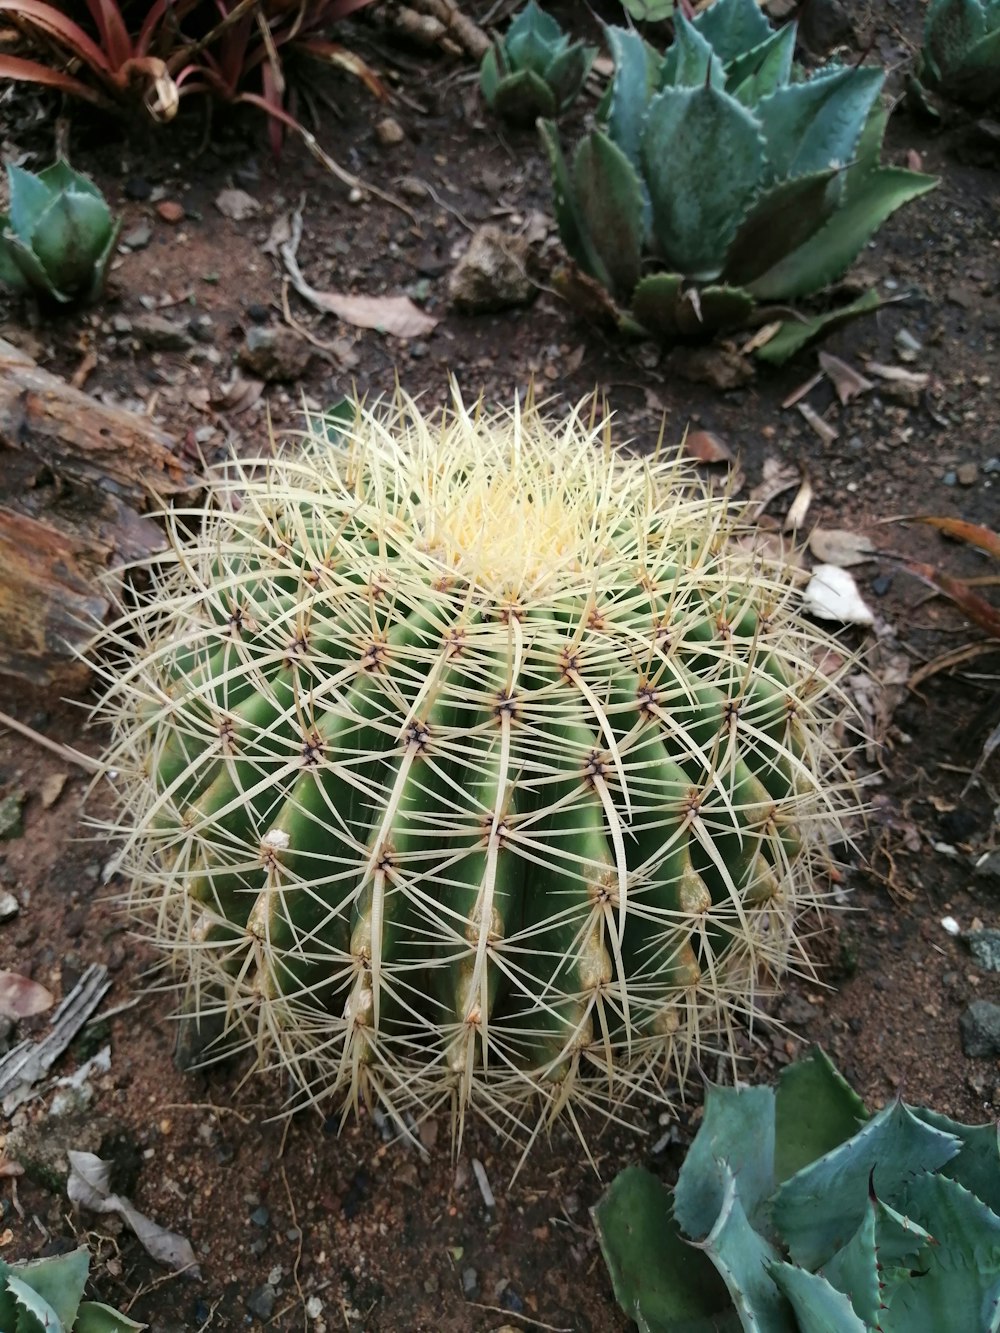 a large cactus plant in the middle of a dirt field